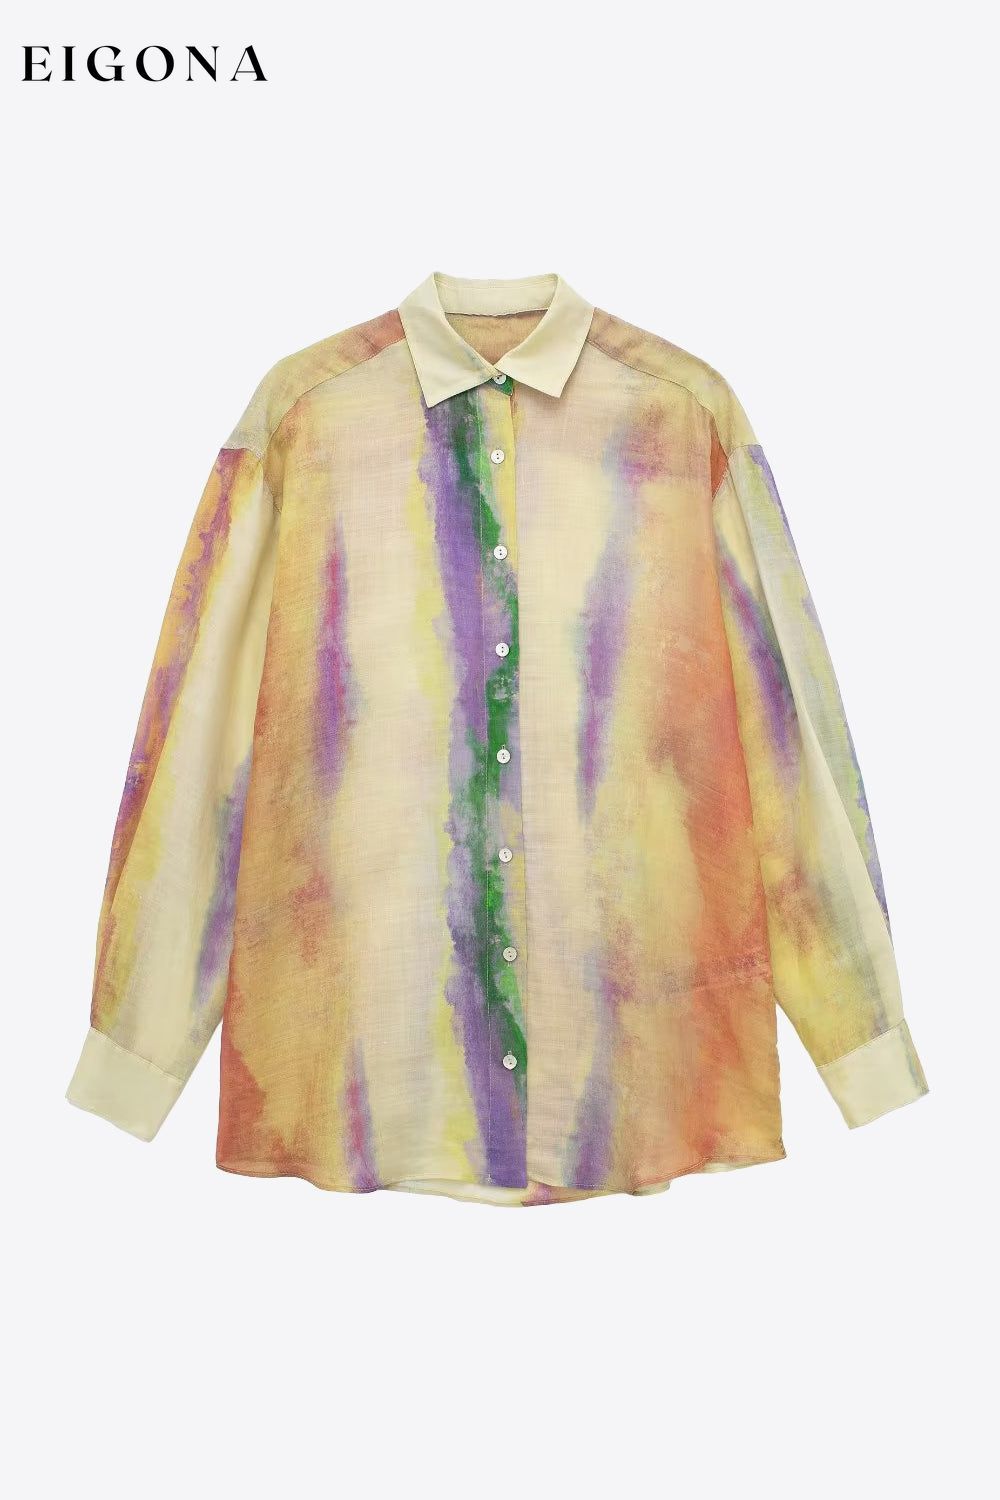 Tie-Dye Long Sleeve Shirt and Tied Skirt Set 2 pieces clothes Dragon-L long sleeve shirts long sleeve top long sleeve tops midi skirts set sets Ship From Overseas Shipping Delay 10/01/2023 - 10/03/2023 shirt shirts skirt skirts top tops